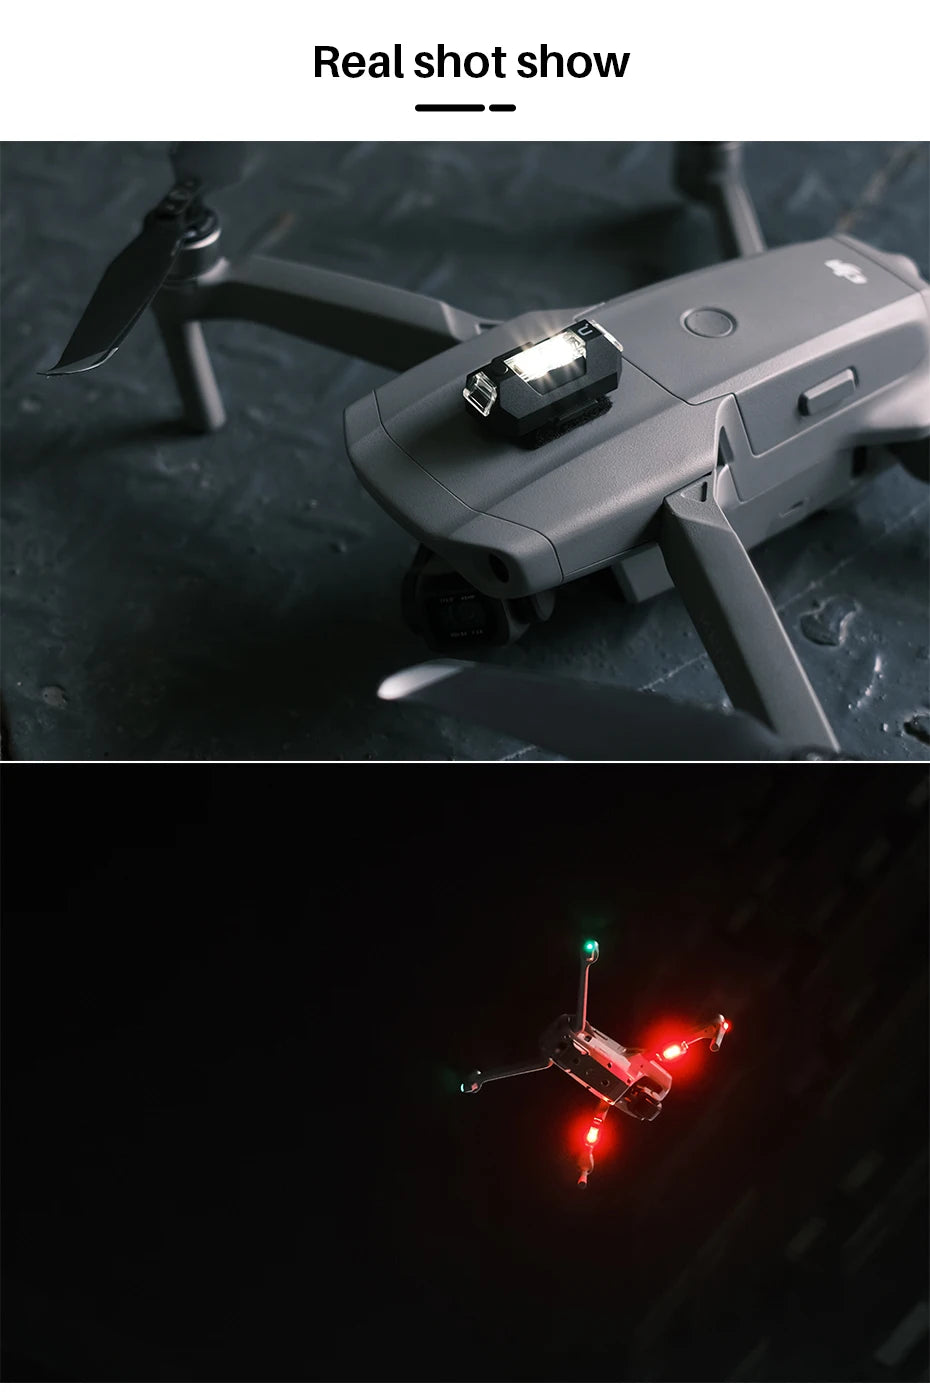 Ulanzi DR-02 mini strobe light is designed to prevent drones from